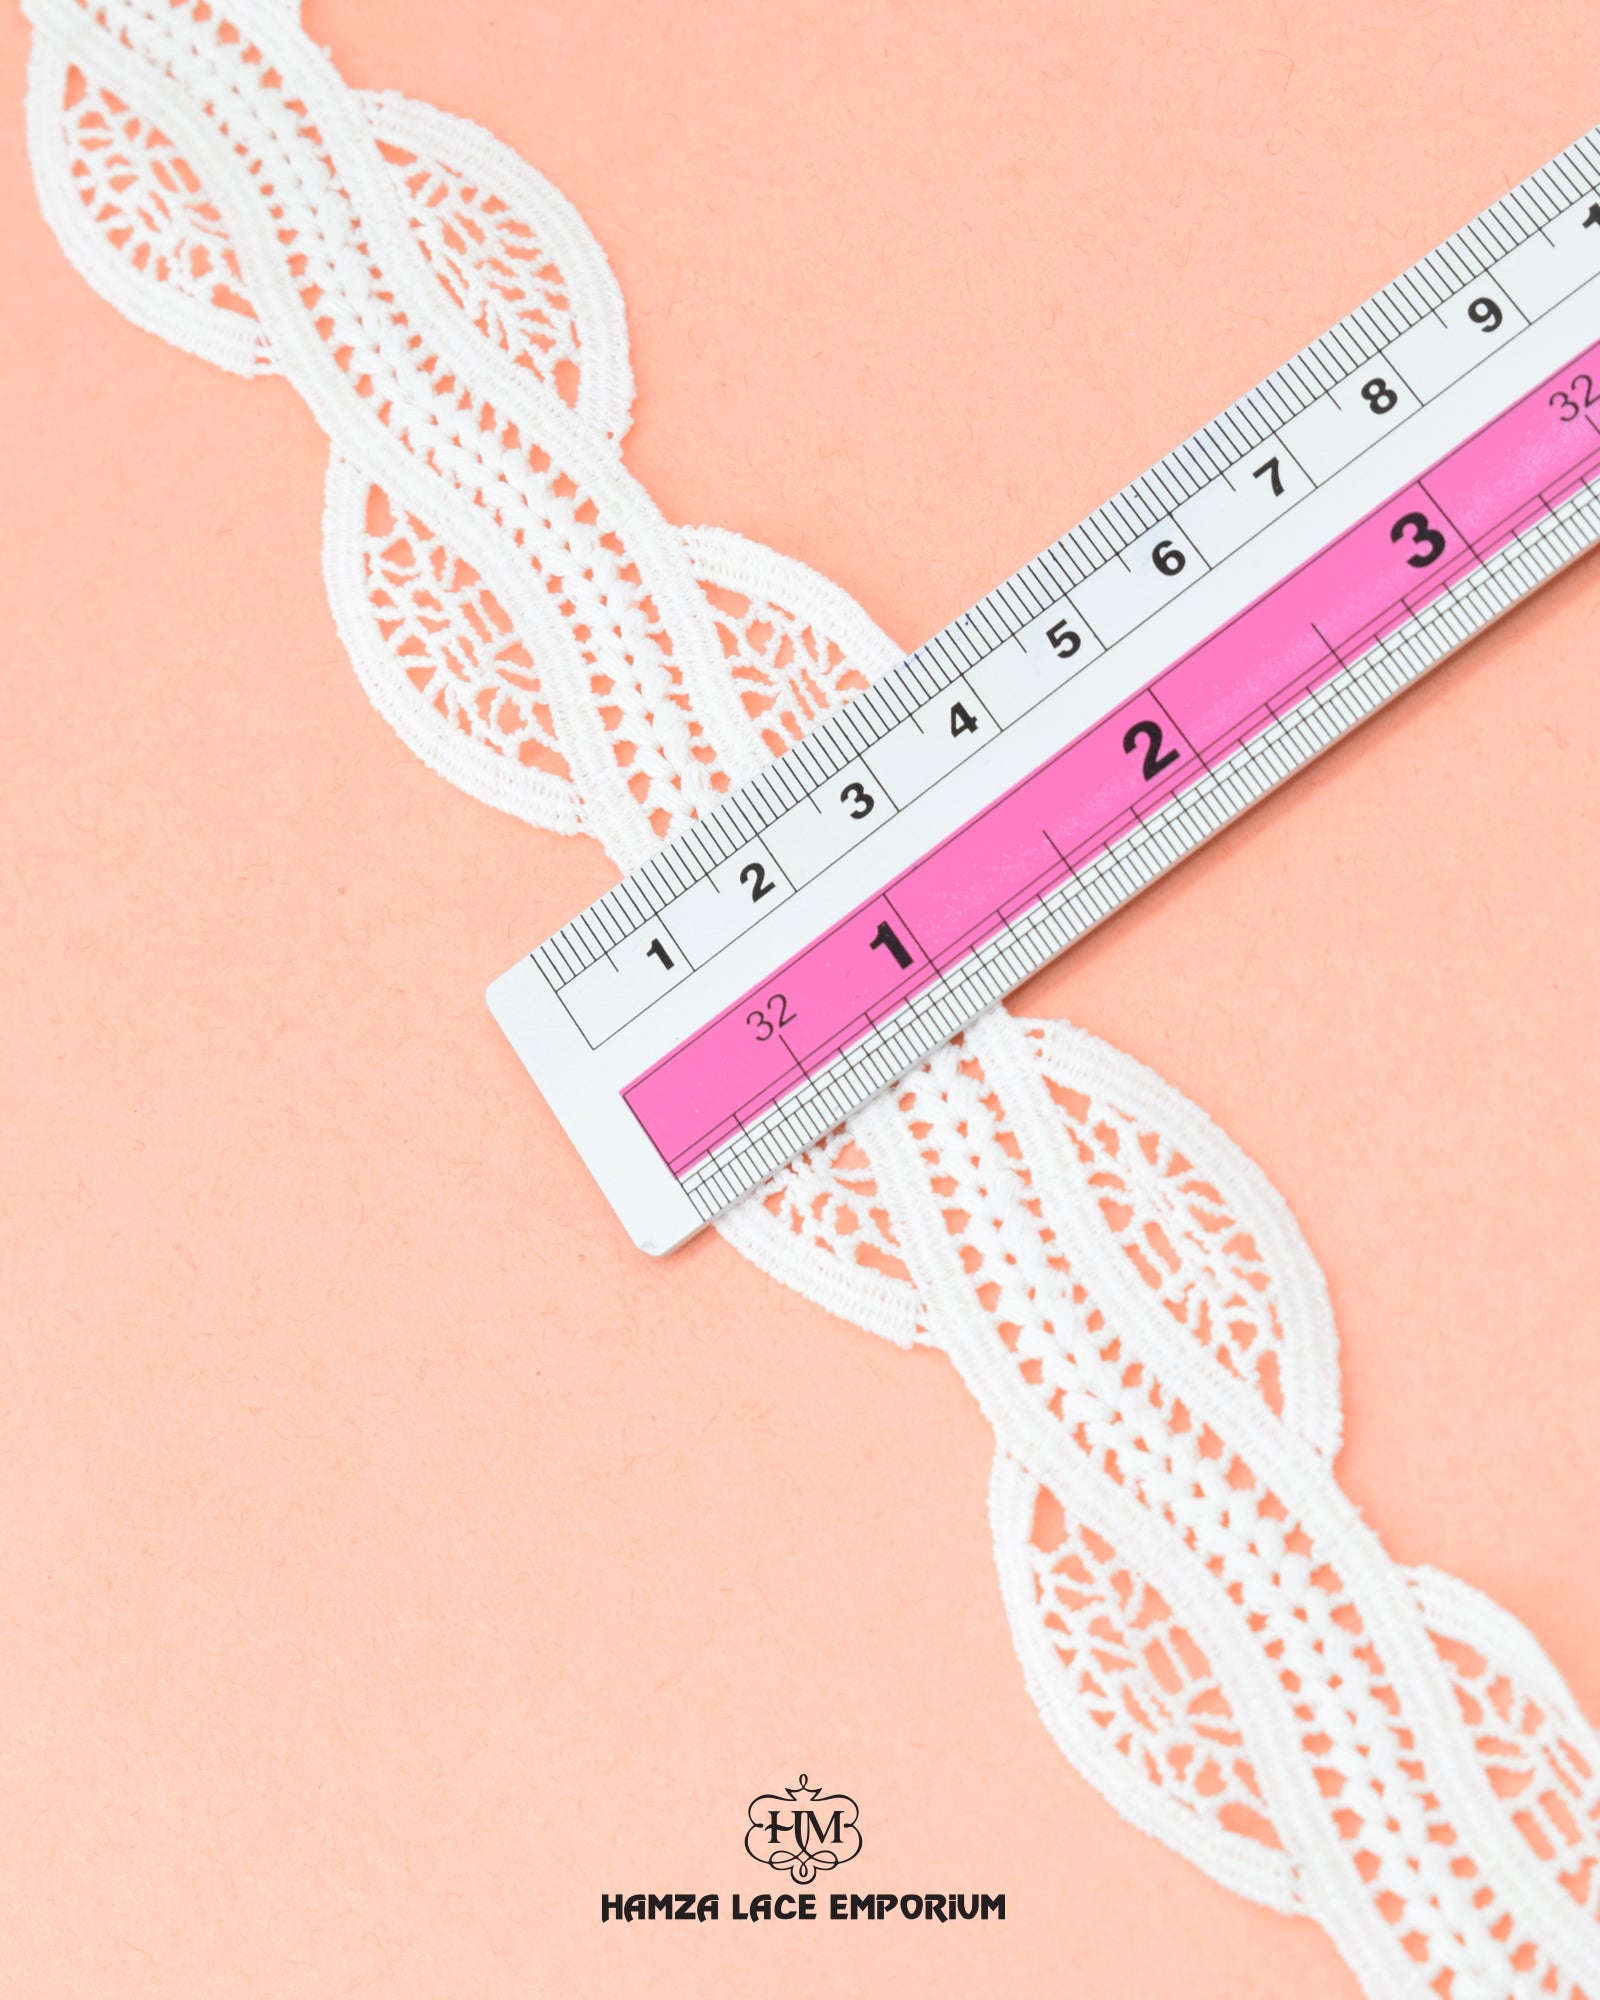 Size of the 'Center Scallop Lace 2900' is shown with the help of a ruler as '1.5' inches